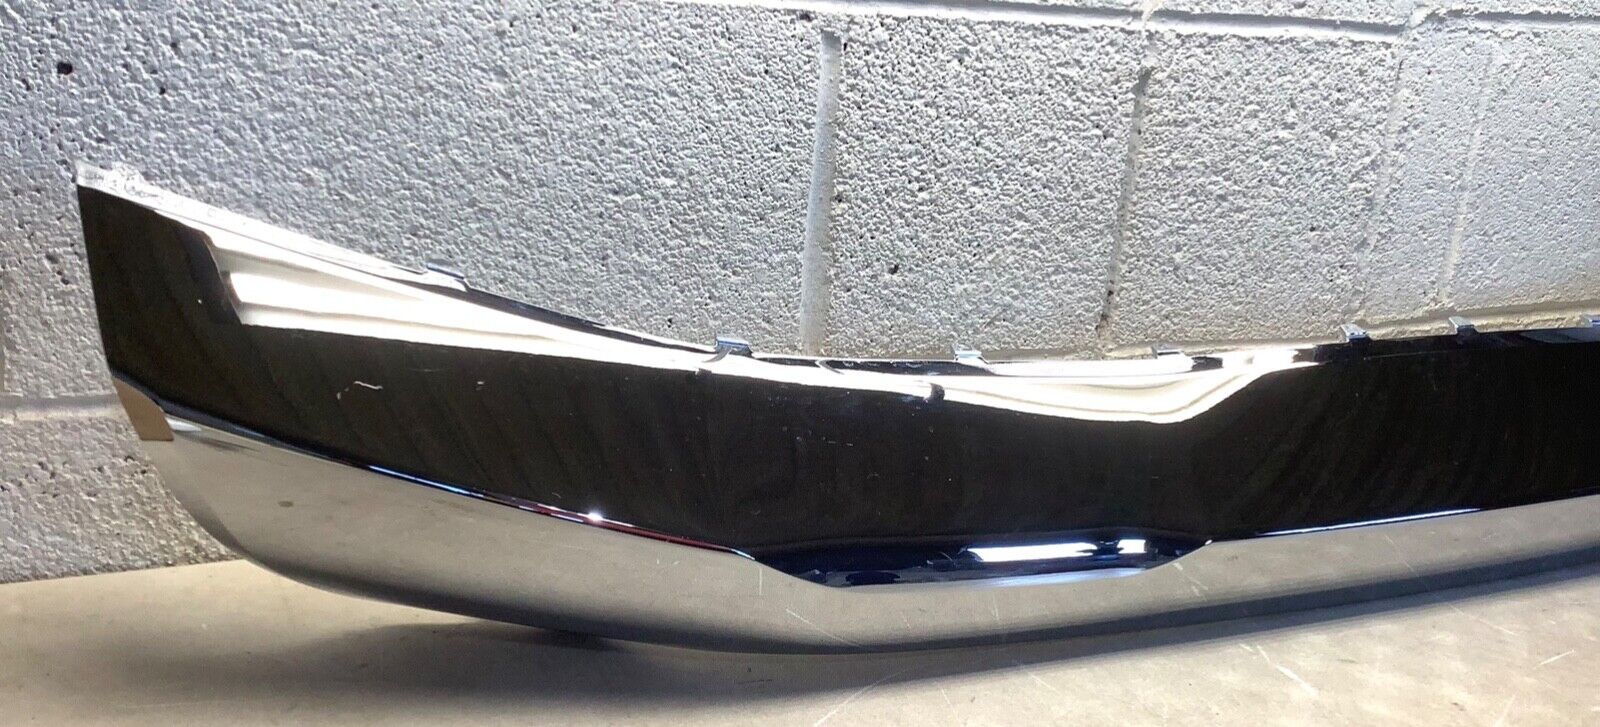 2021-2022 Palisade Front Bumper Chrome Trim Molding GREAT CONDITION🌟86577-S8100